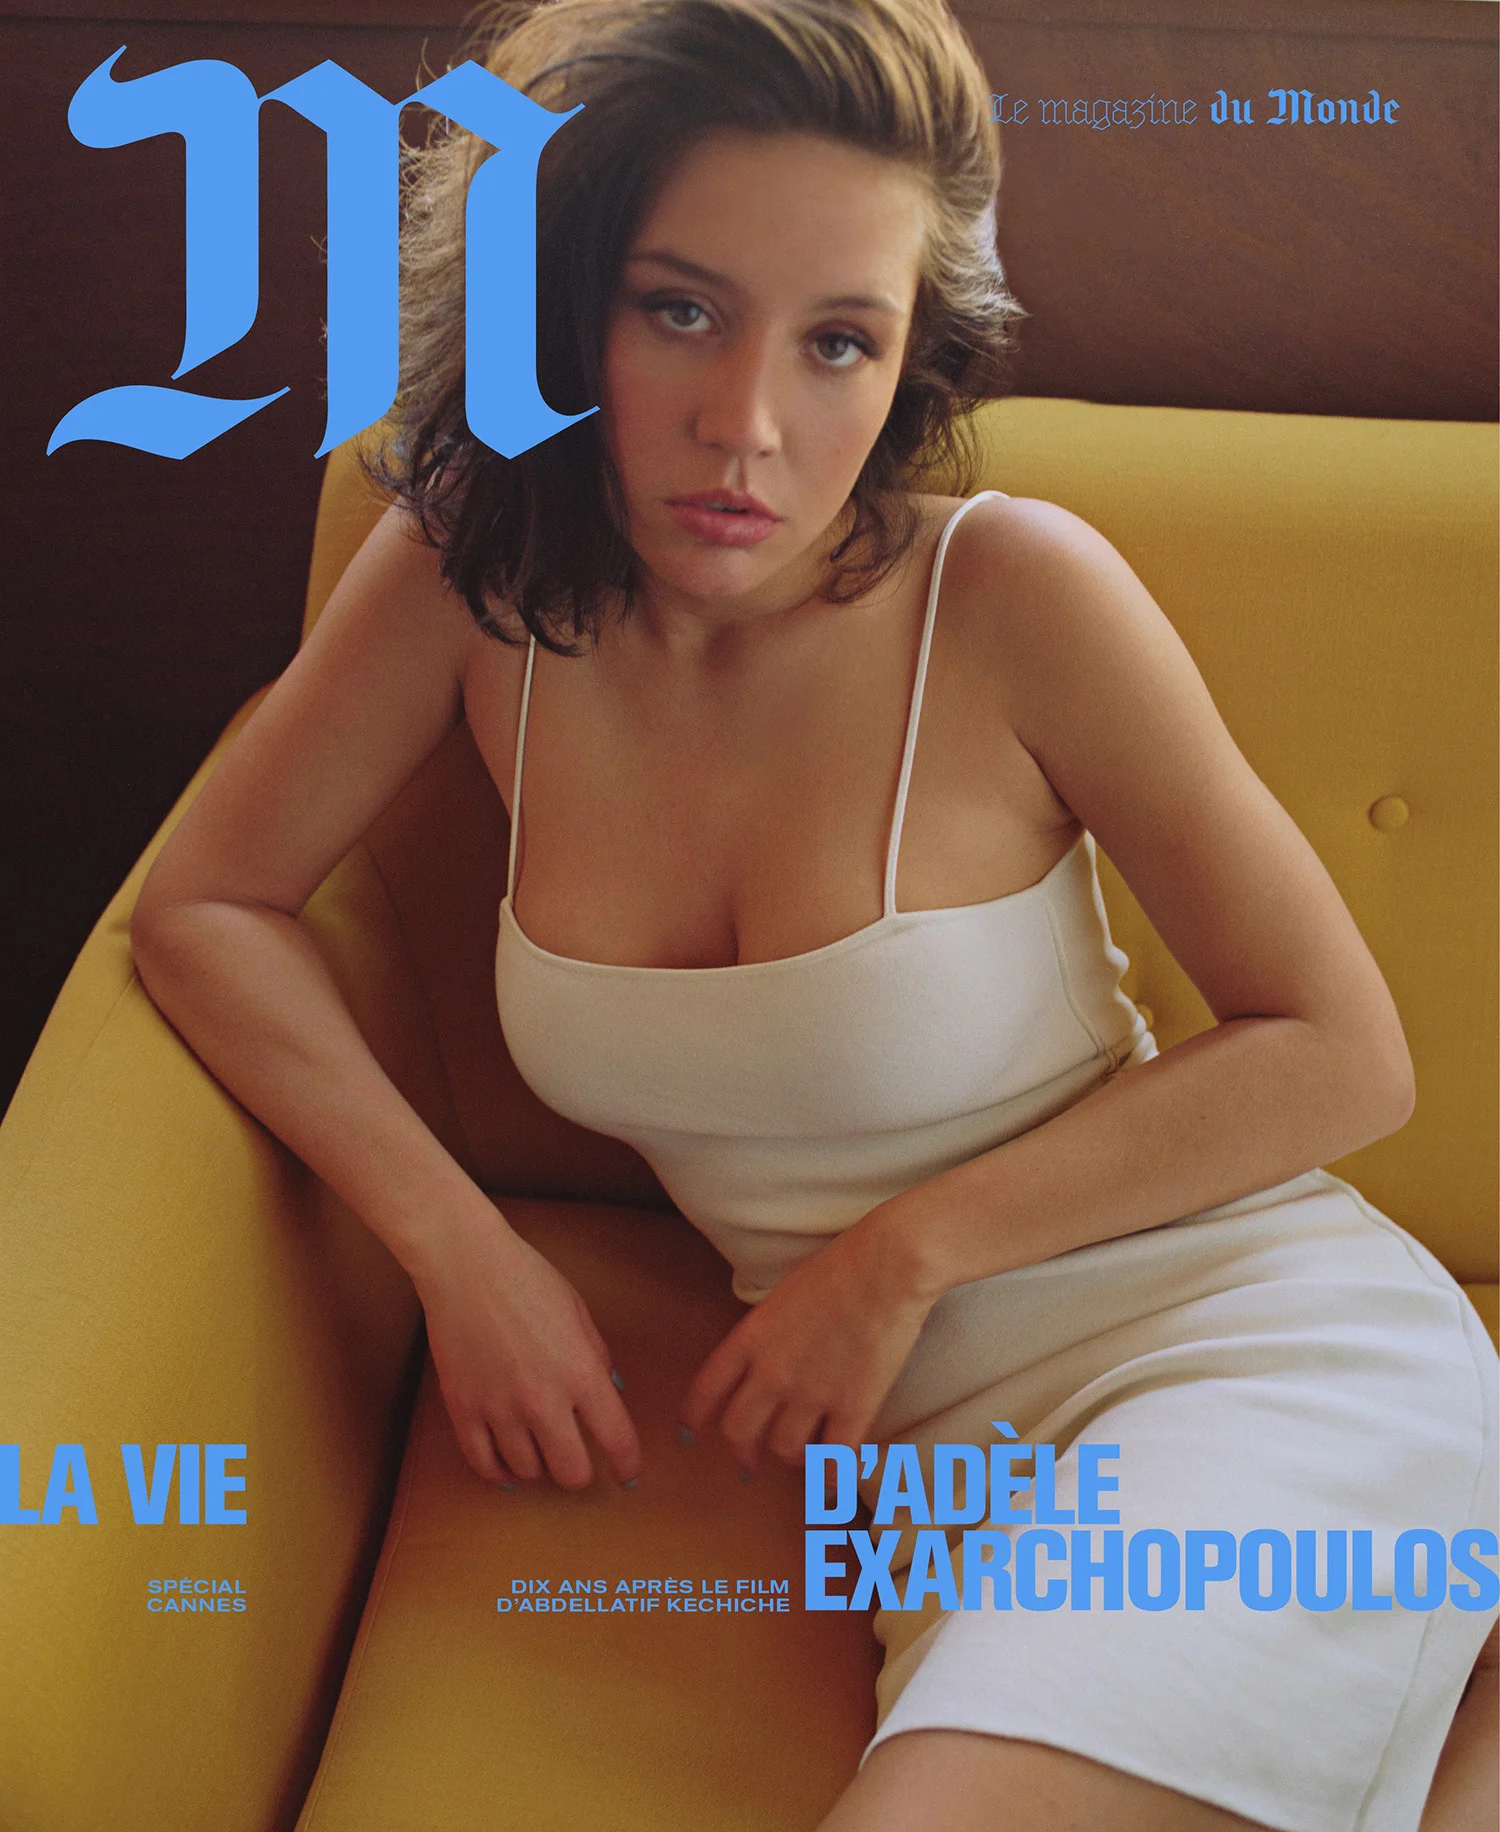 Adèle Exarchopoulos covers M Le magazine du Monde May 14th, 2022 by Anthony Seklaoui